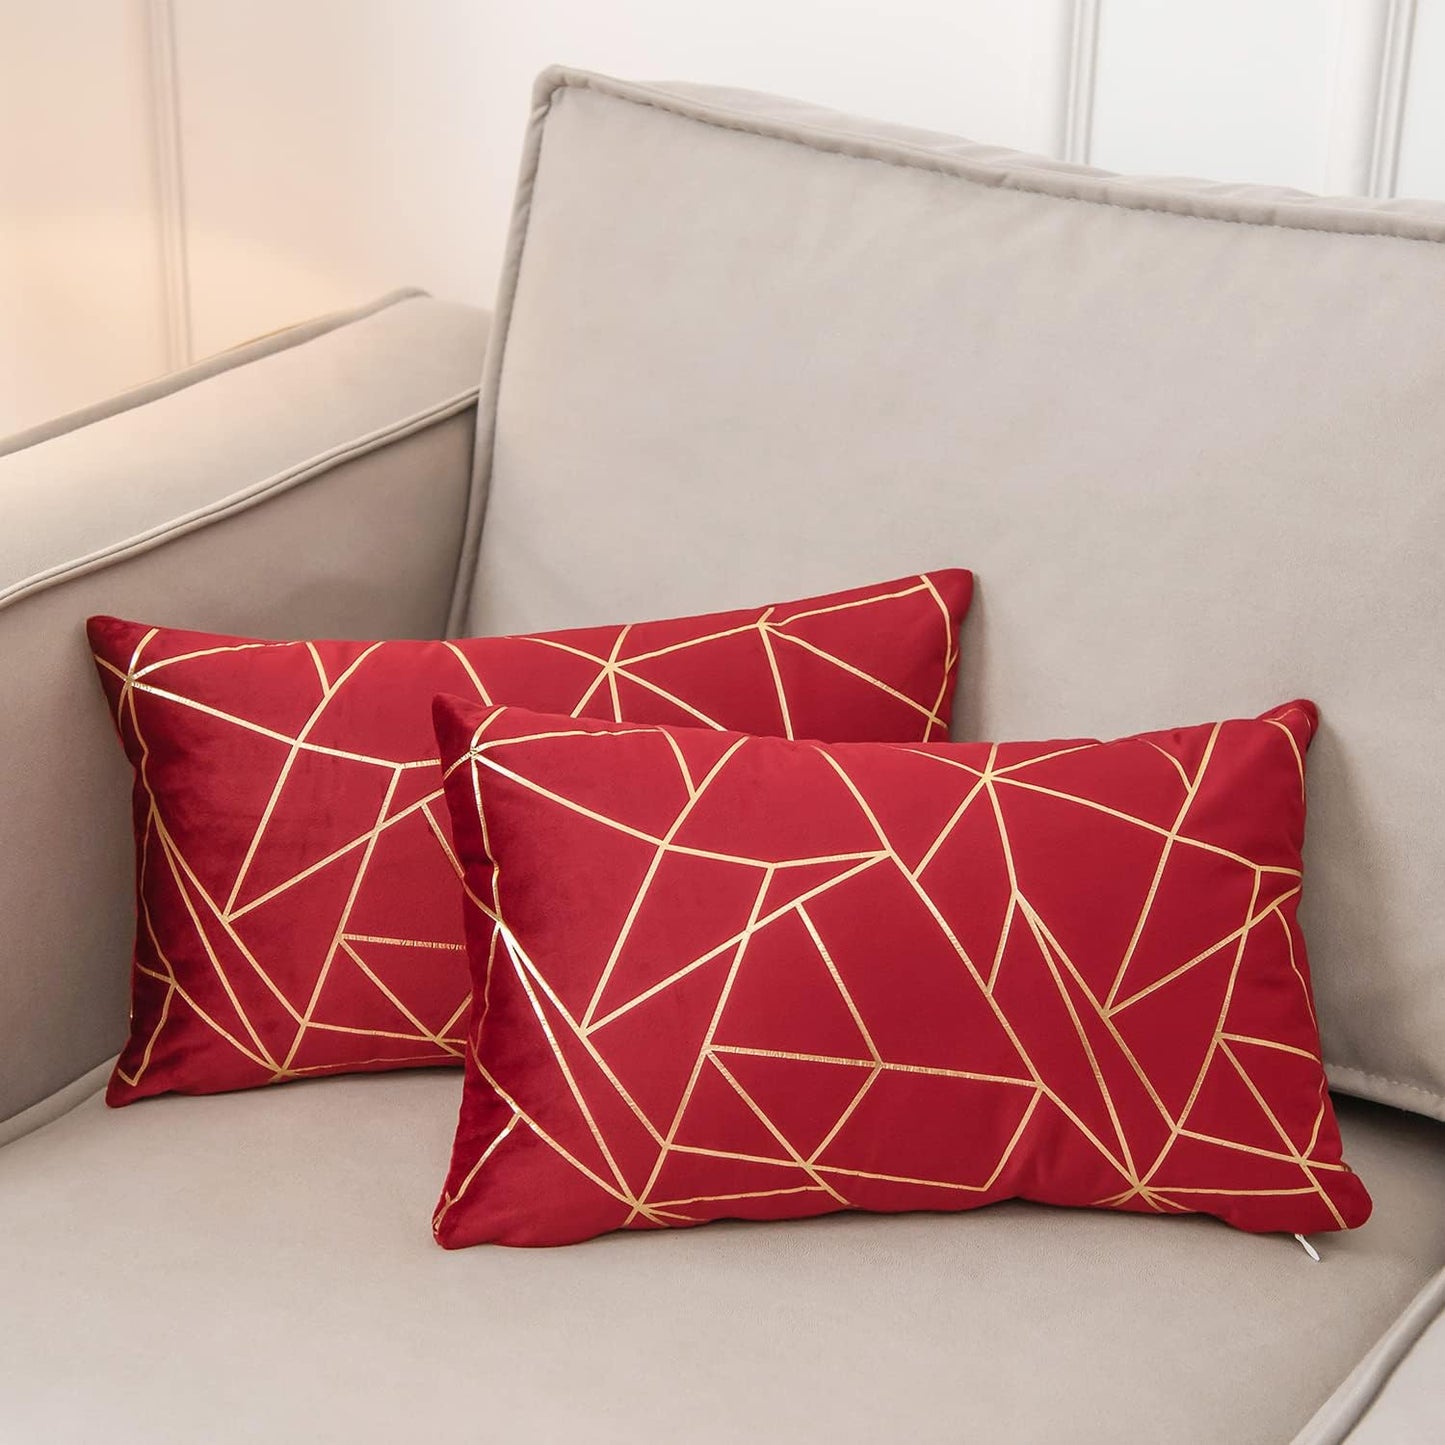 Pack of 2 Velvet Cushion Cases Decorative Gold Foil Geometric Pattern Throw Pillow Covers for Modern Homes Sofa Bedroom Couch Car Living Room Wine Red and Gold 12"X20"